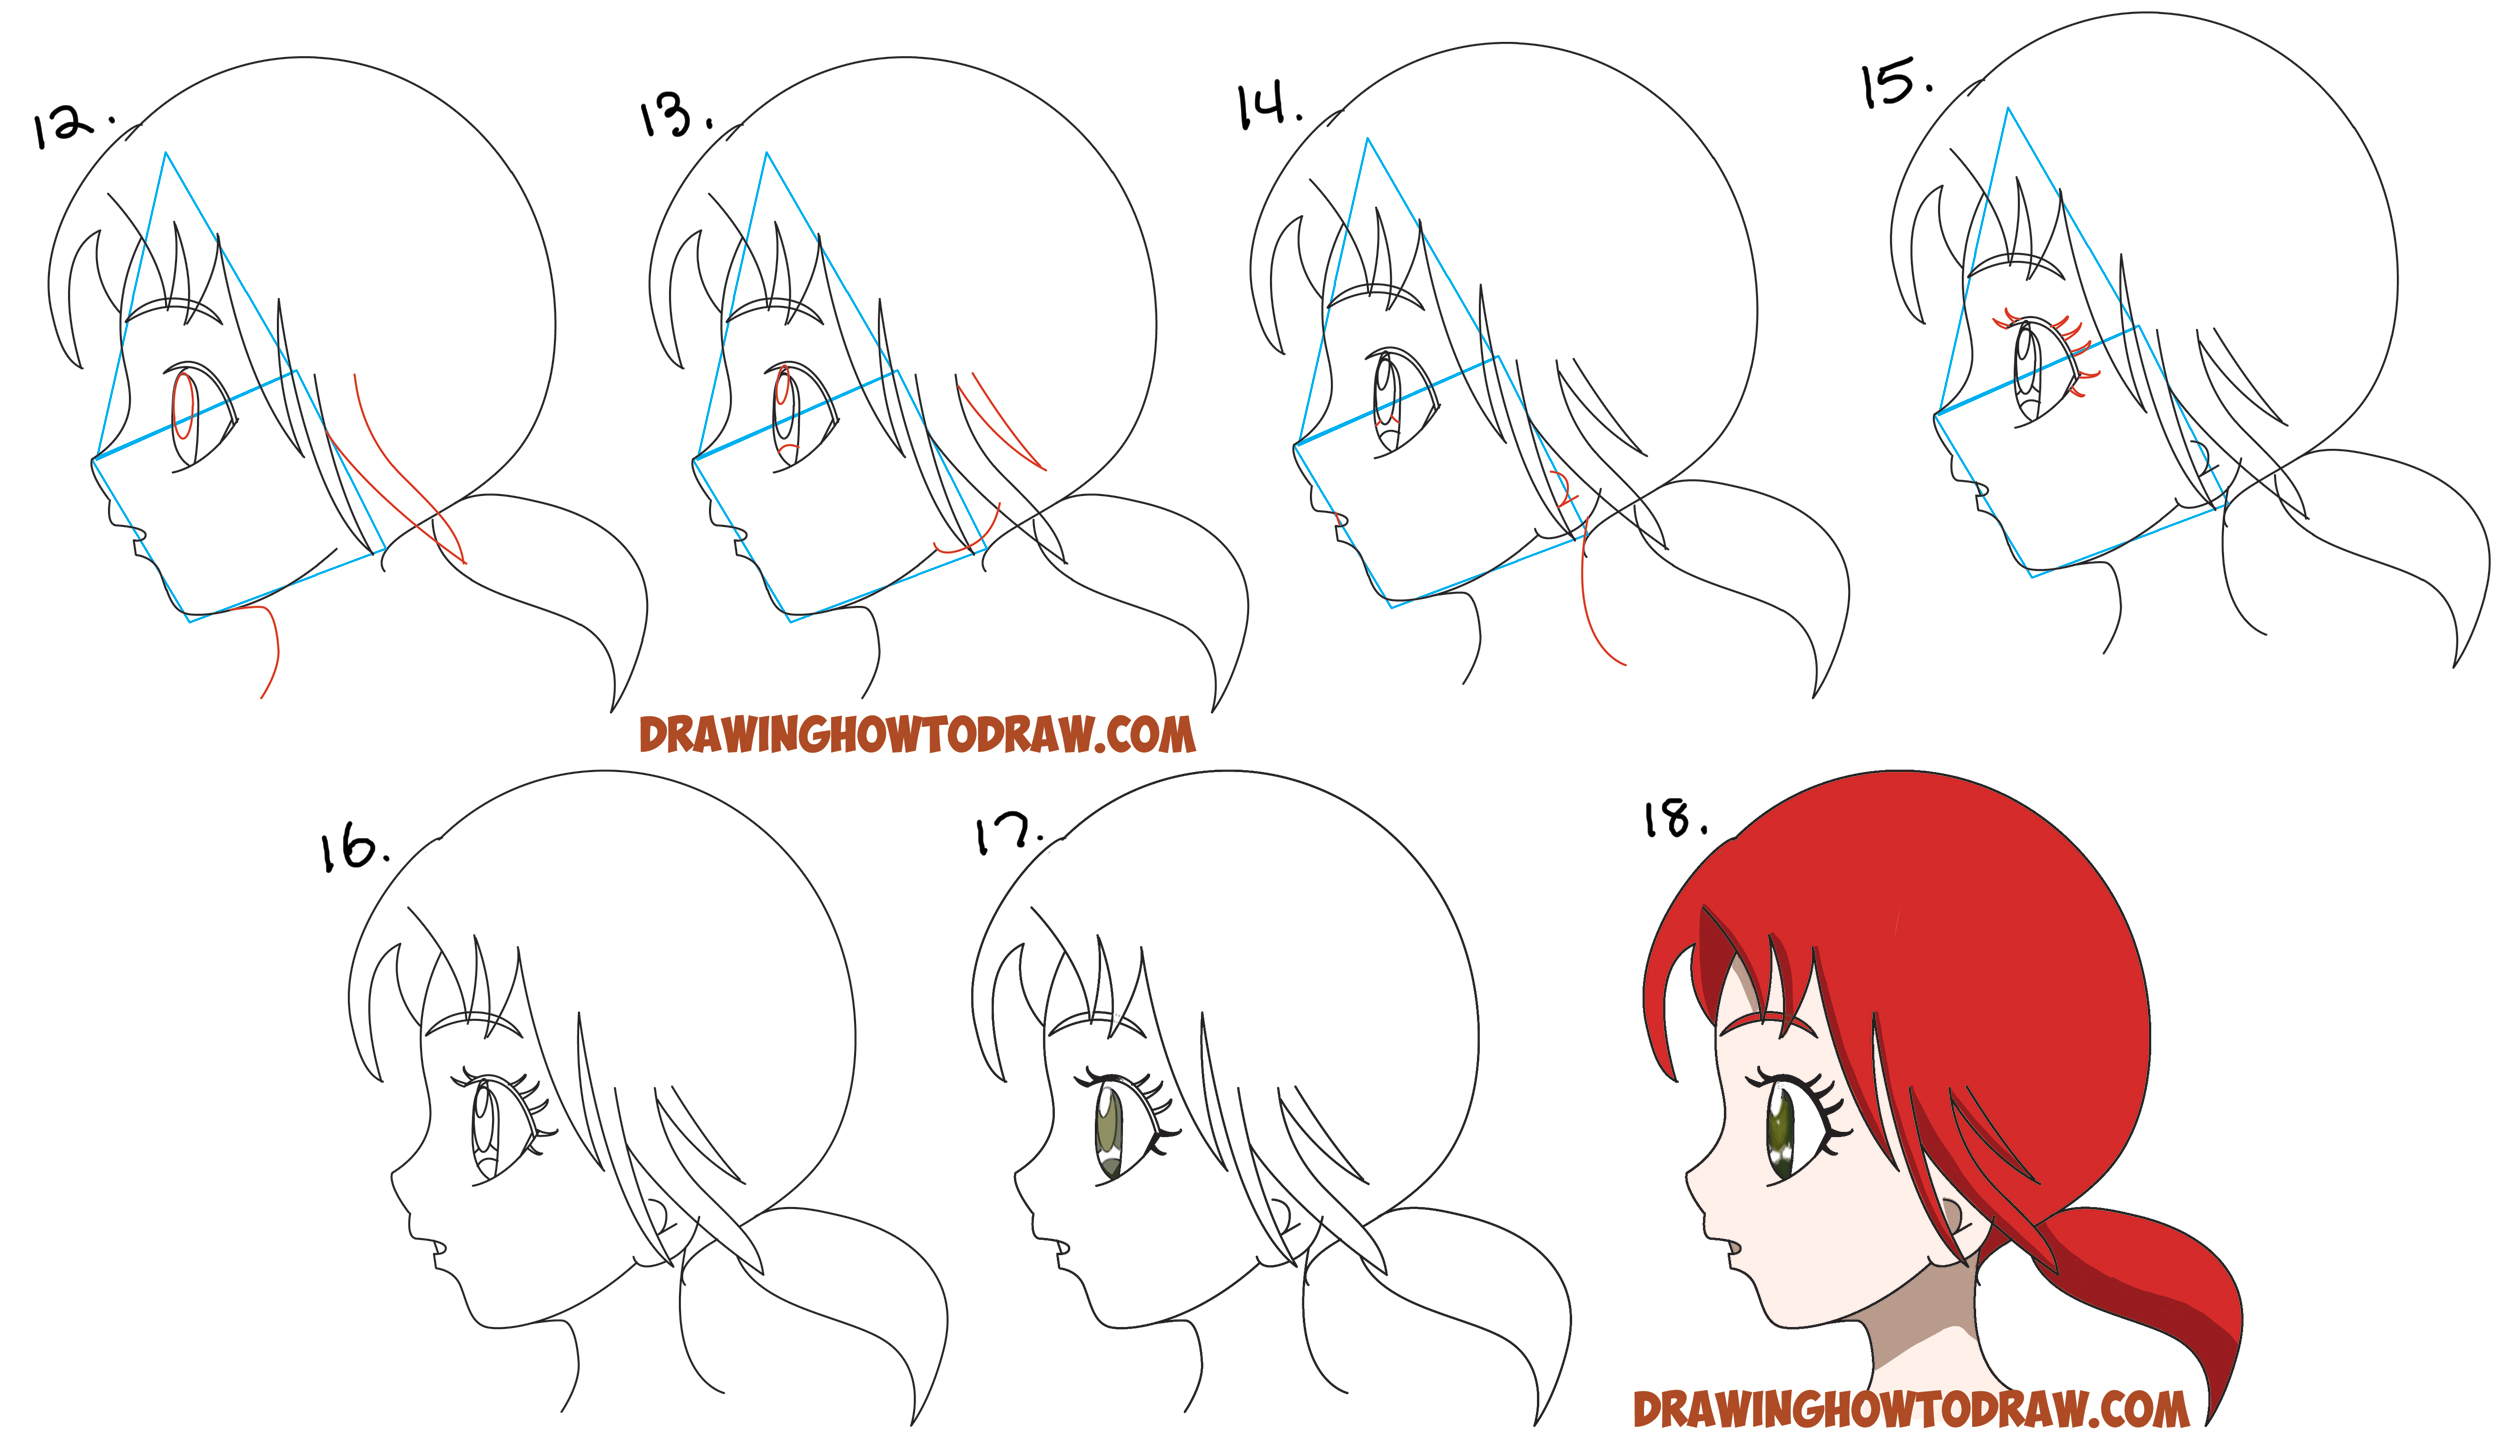 How to Draw Anime Eyes and Eye Expressions Tutorial - AnimeOutline